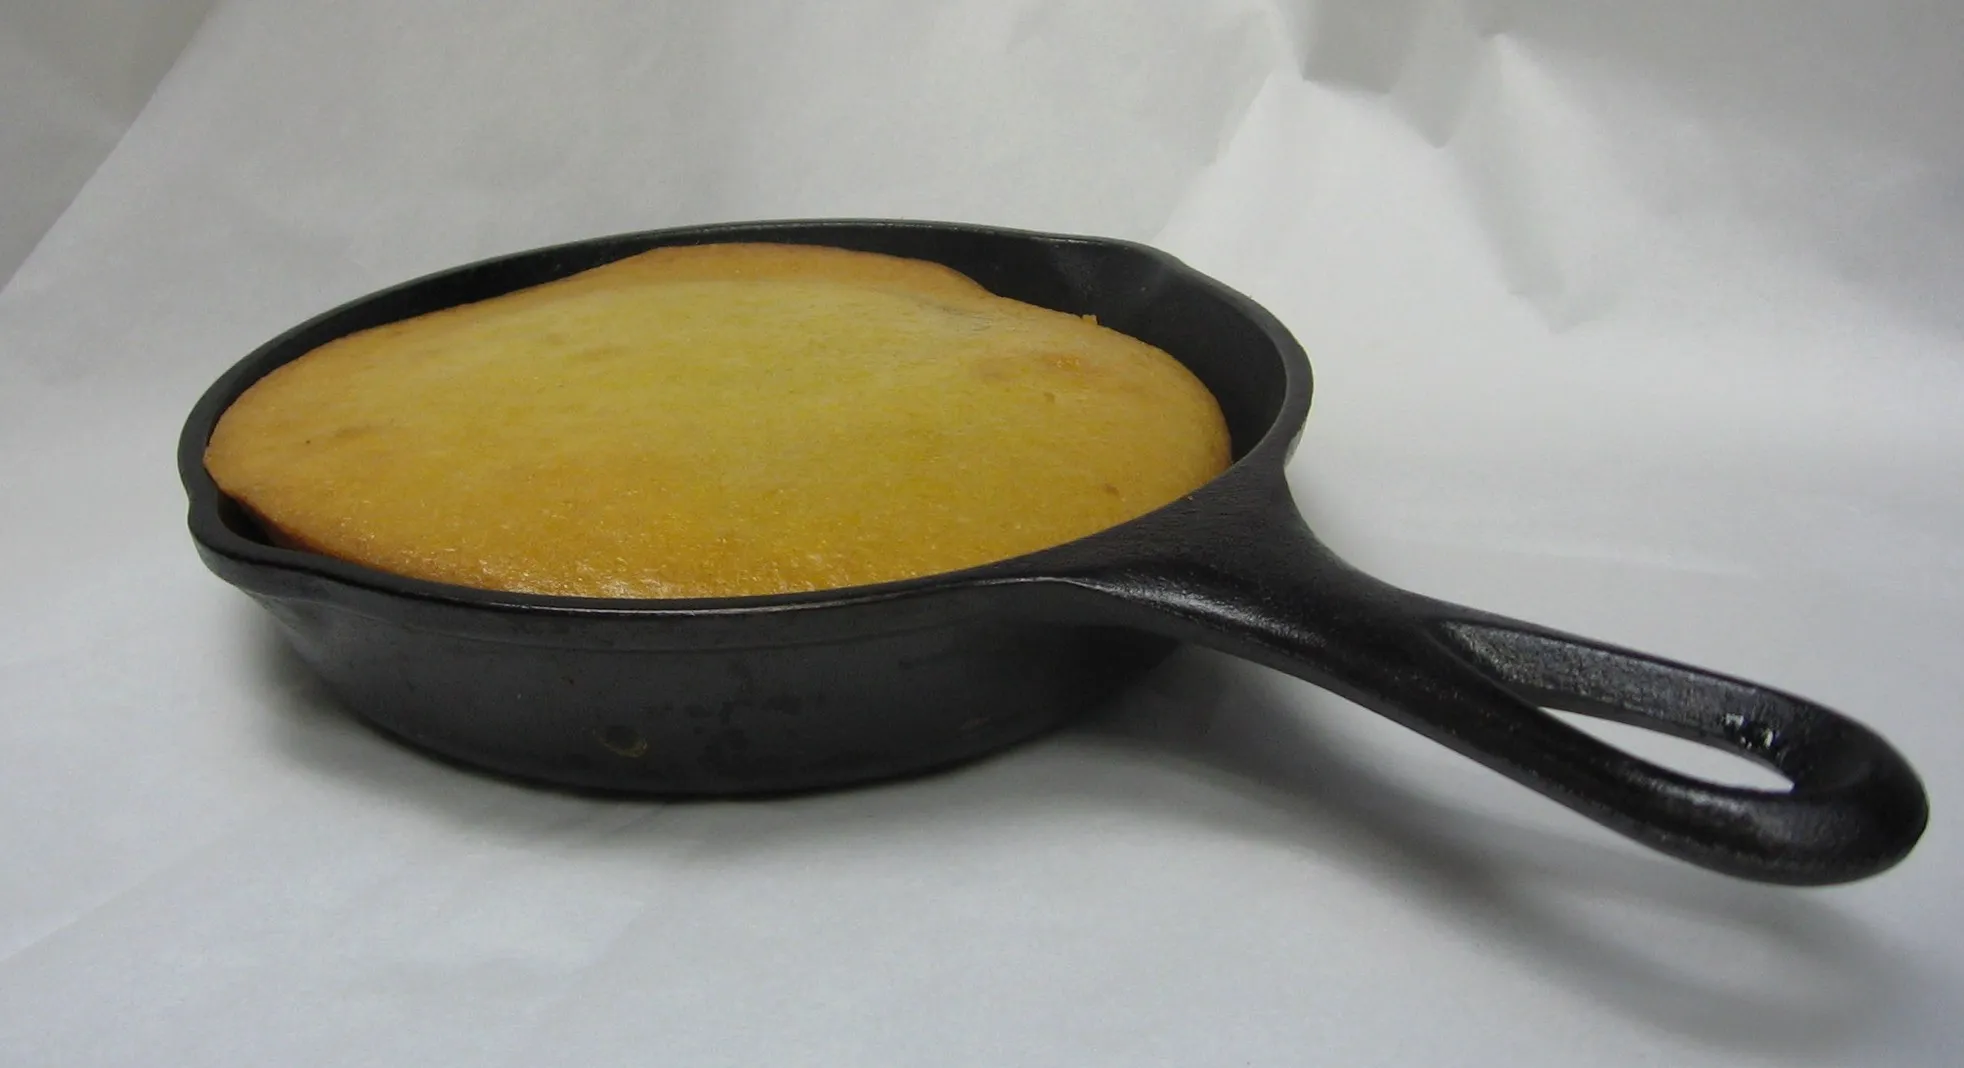 Lodge Cast Iron Skillet Review: A Comprehensive Guide to the Best Cast Iron Skillet